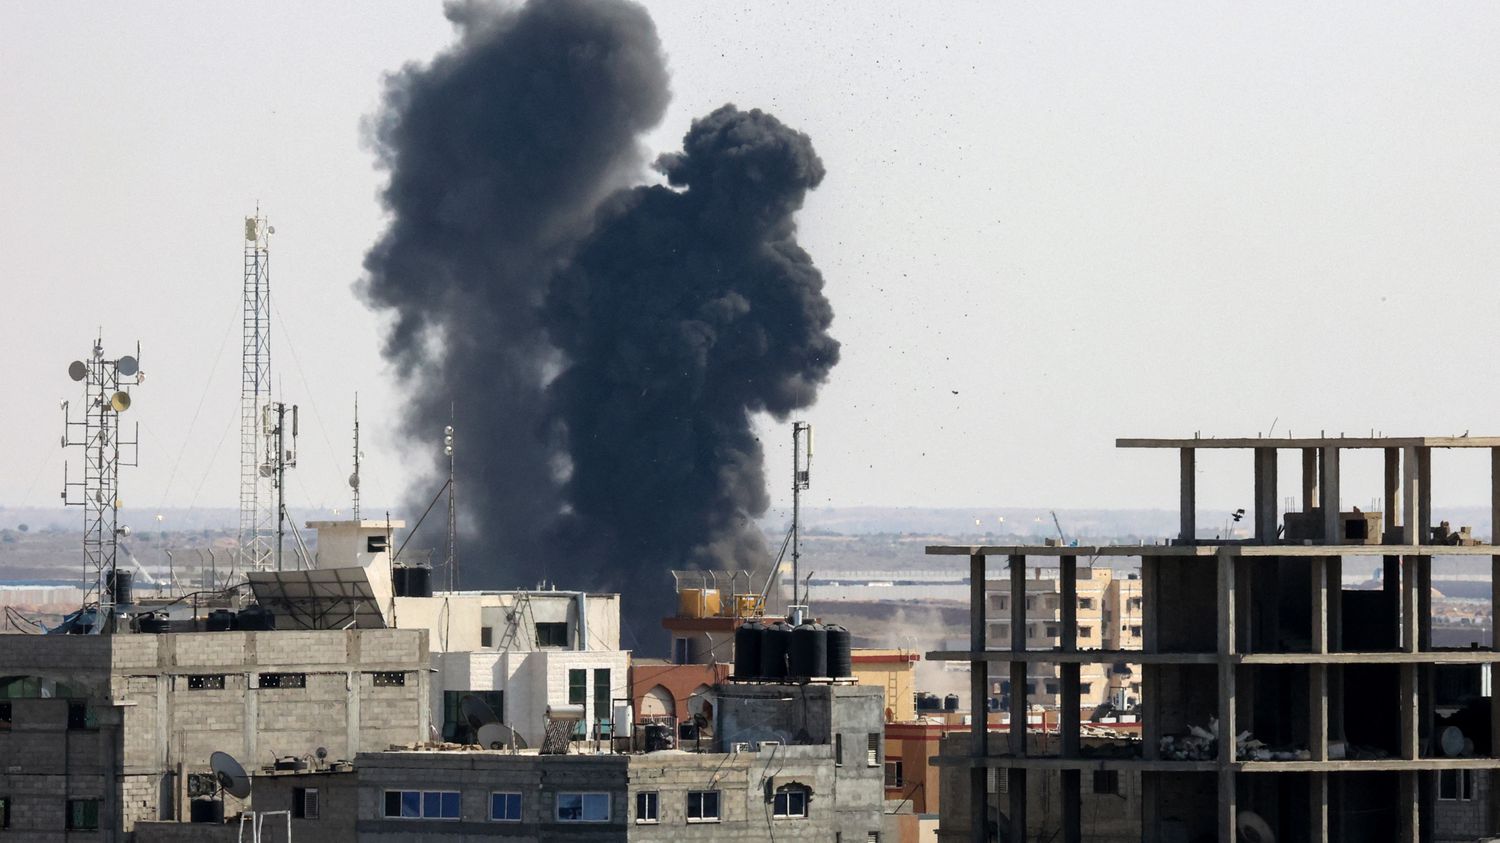 Three minutes into truce, Israel announces strikes on Islamic Jihad positions in Gaza 'in response' to rocket fire
